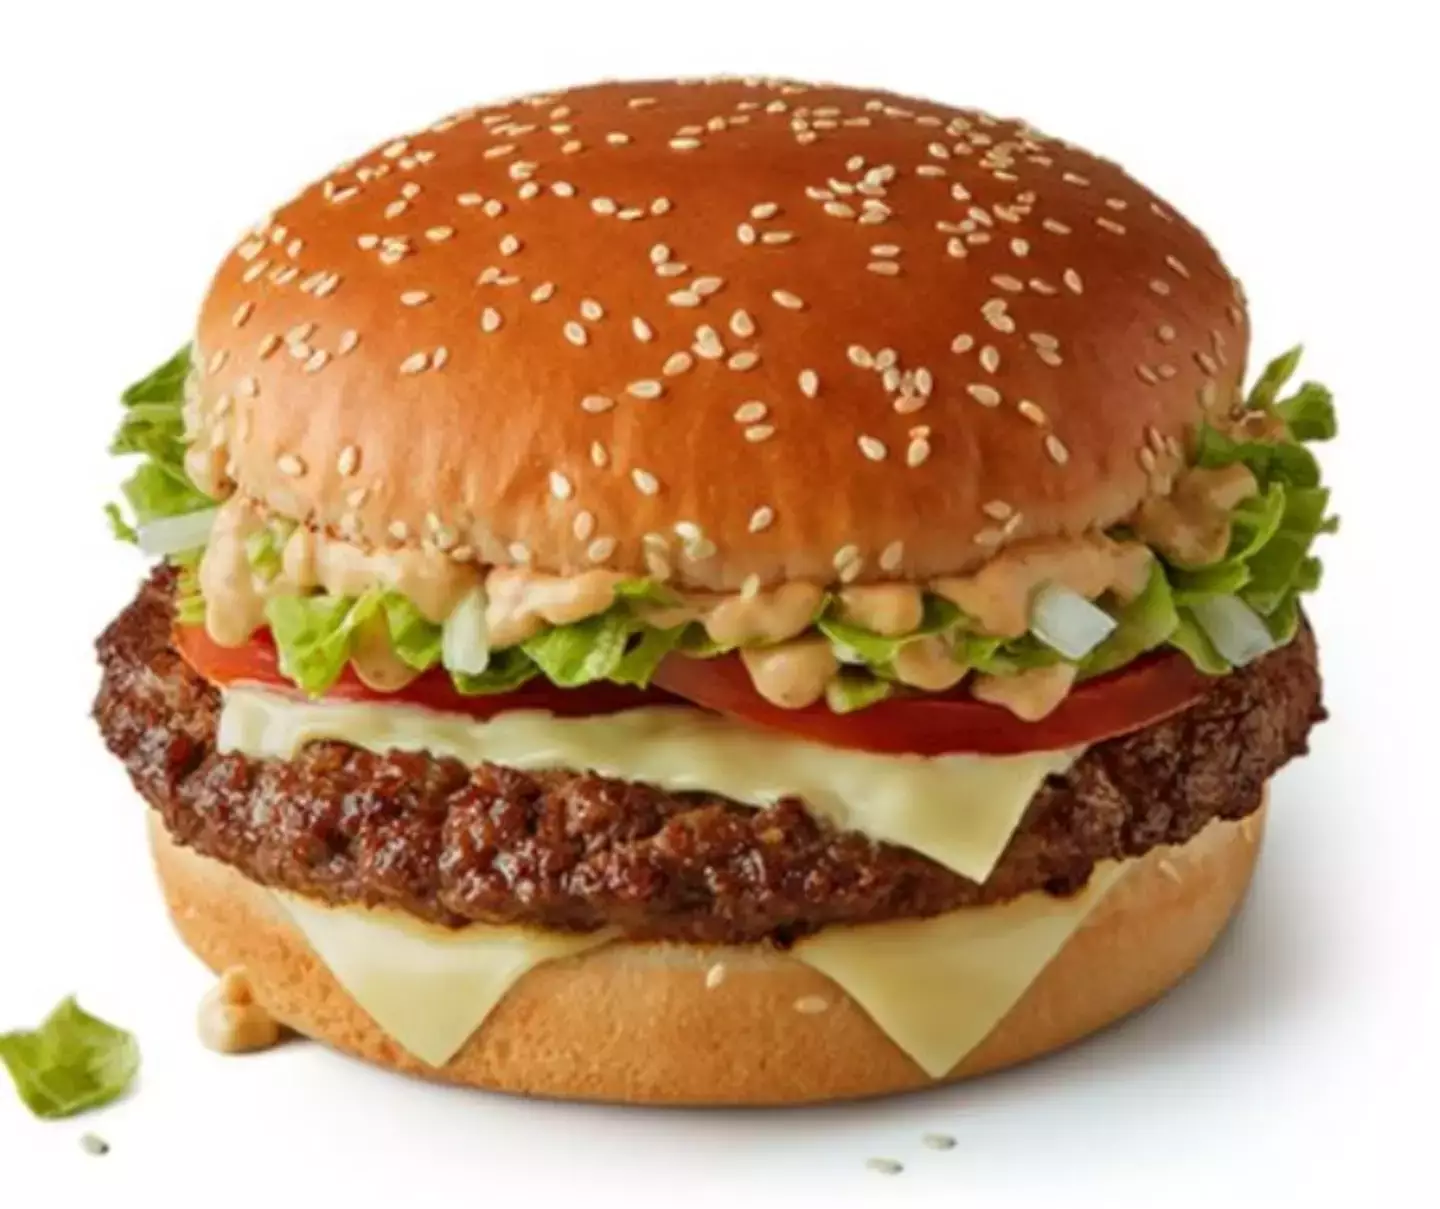 Fans called the Big Tasty the 'best burger ever'.